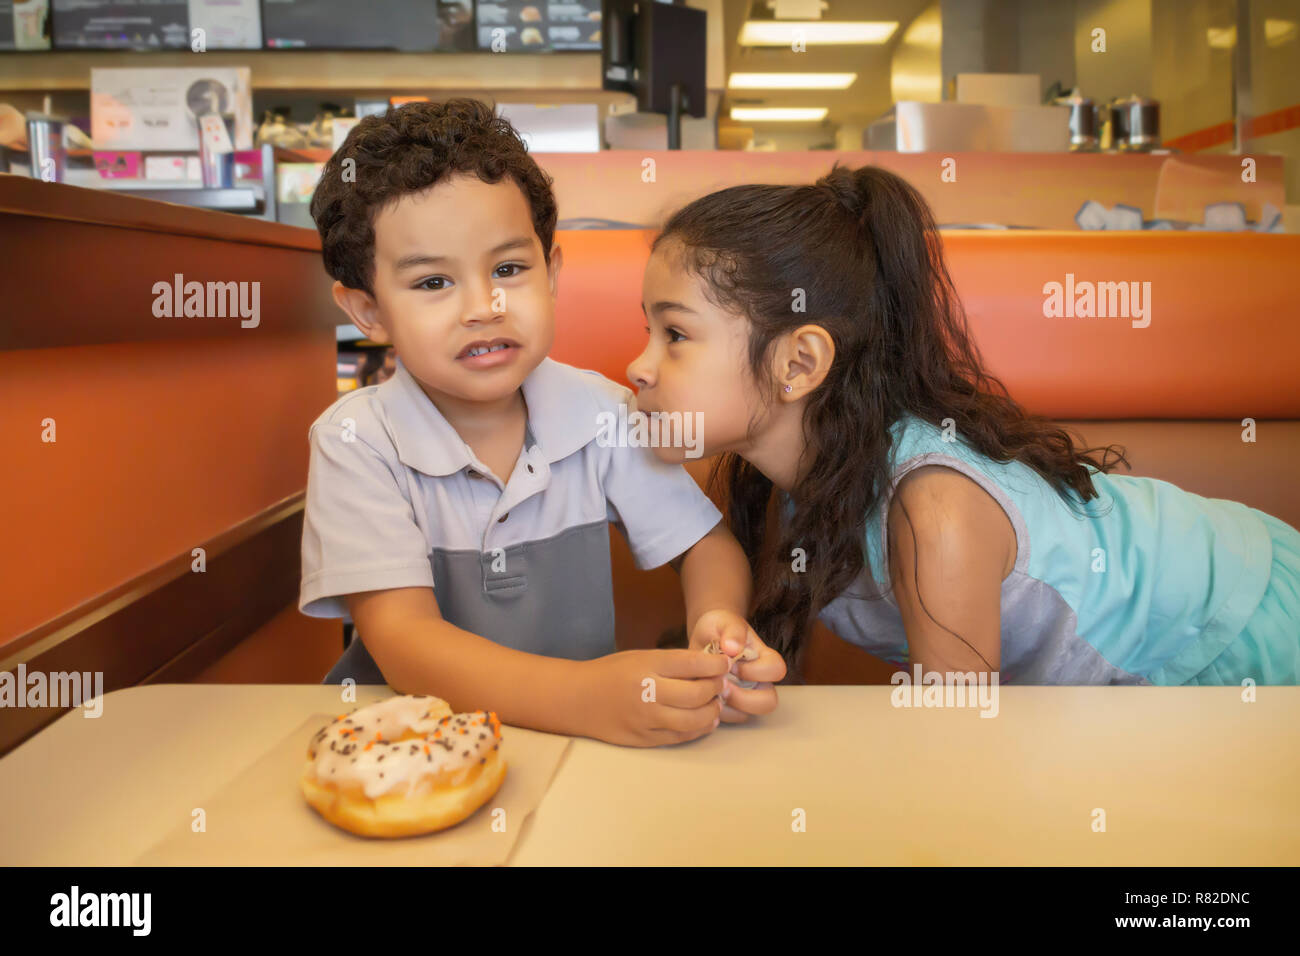 A boy looks at the camera after taking a bite of his donut. Spending time together at a cafe with the older sister is not easy. Stock Photo